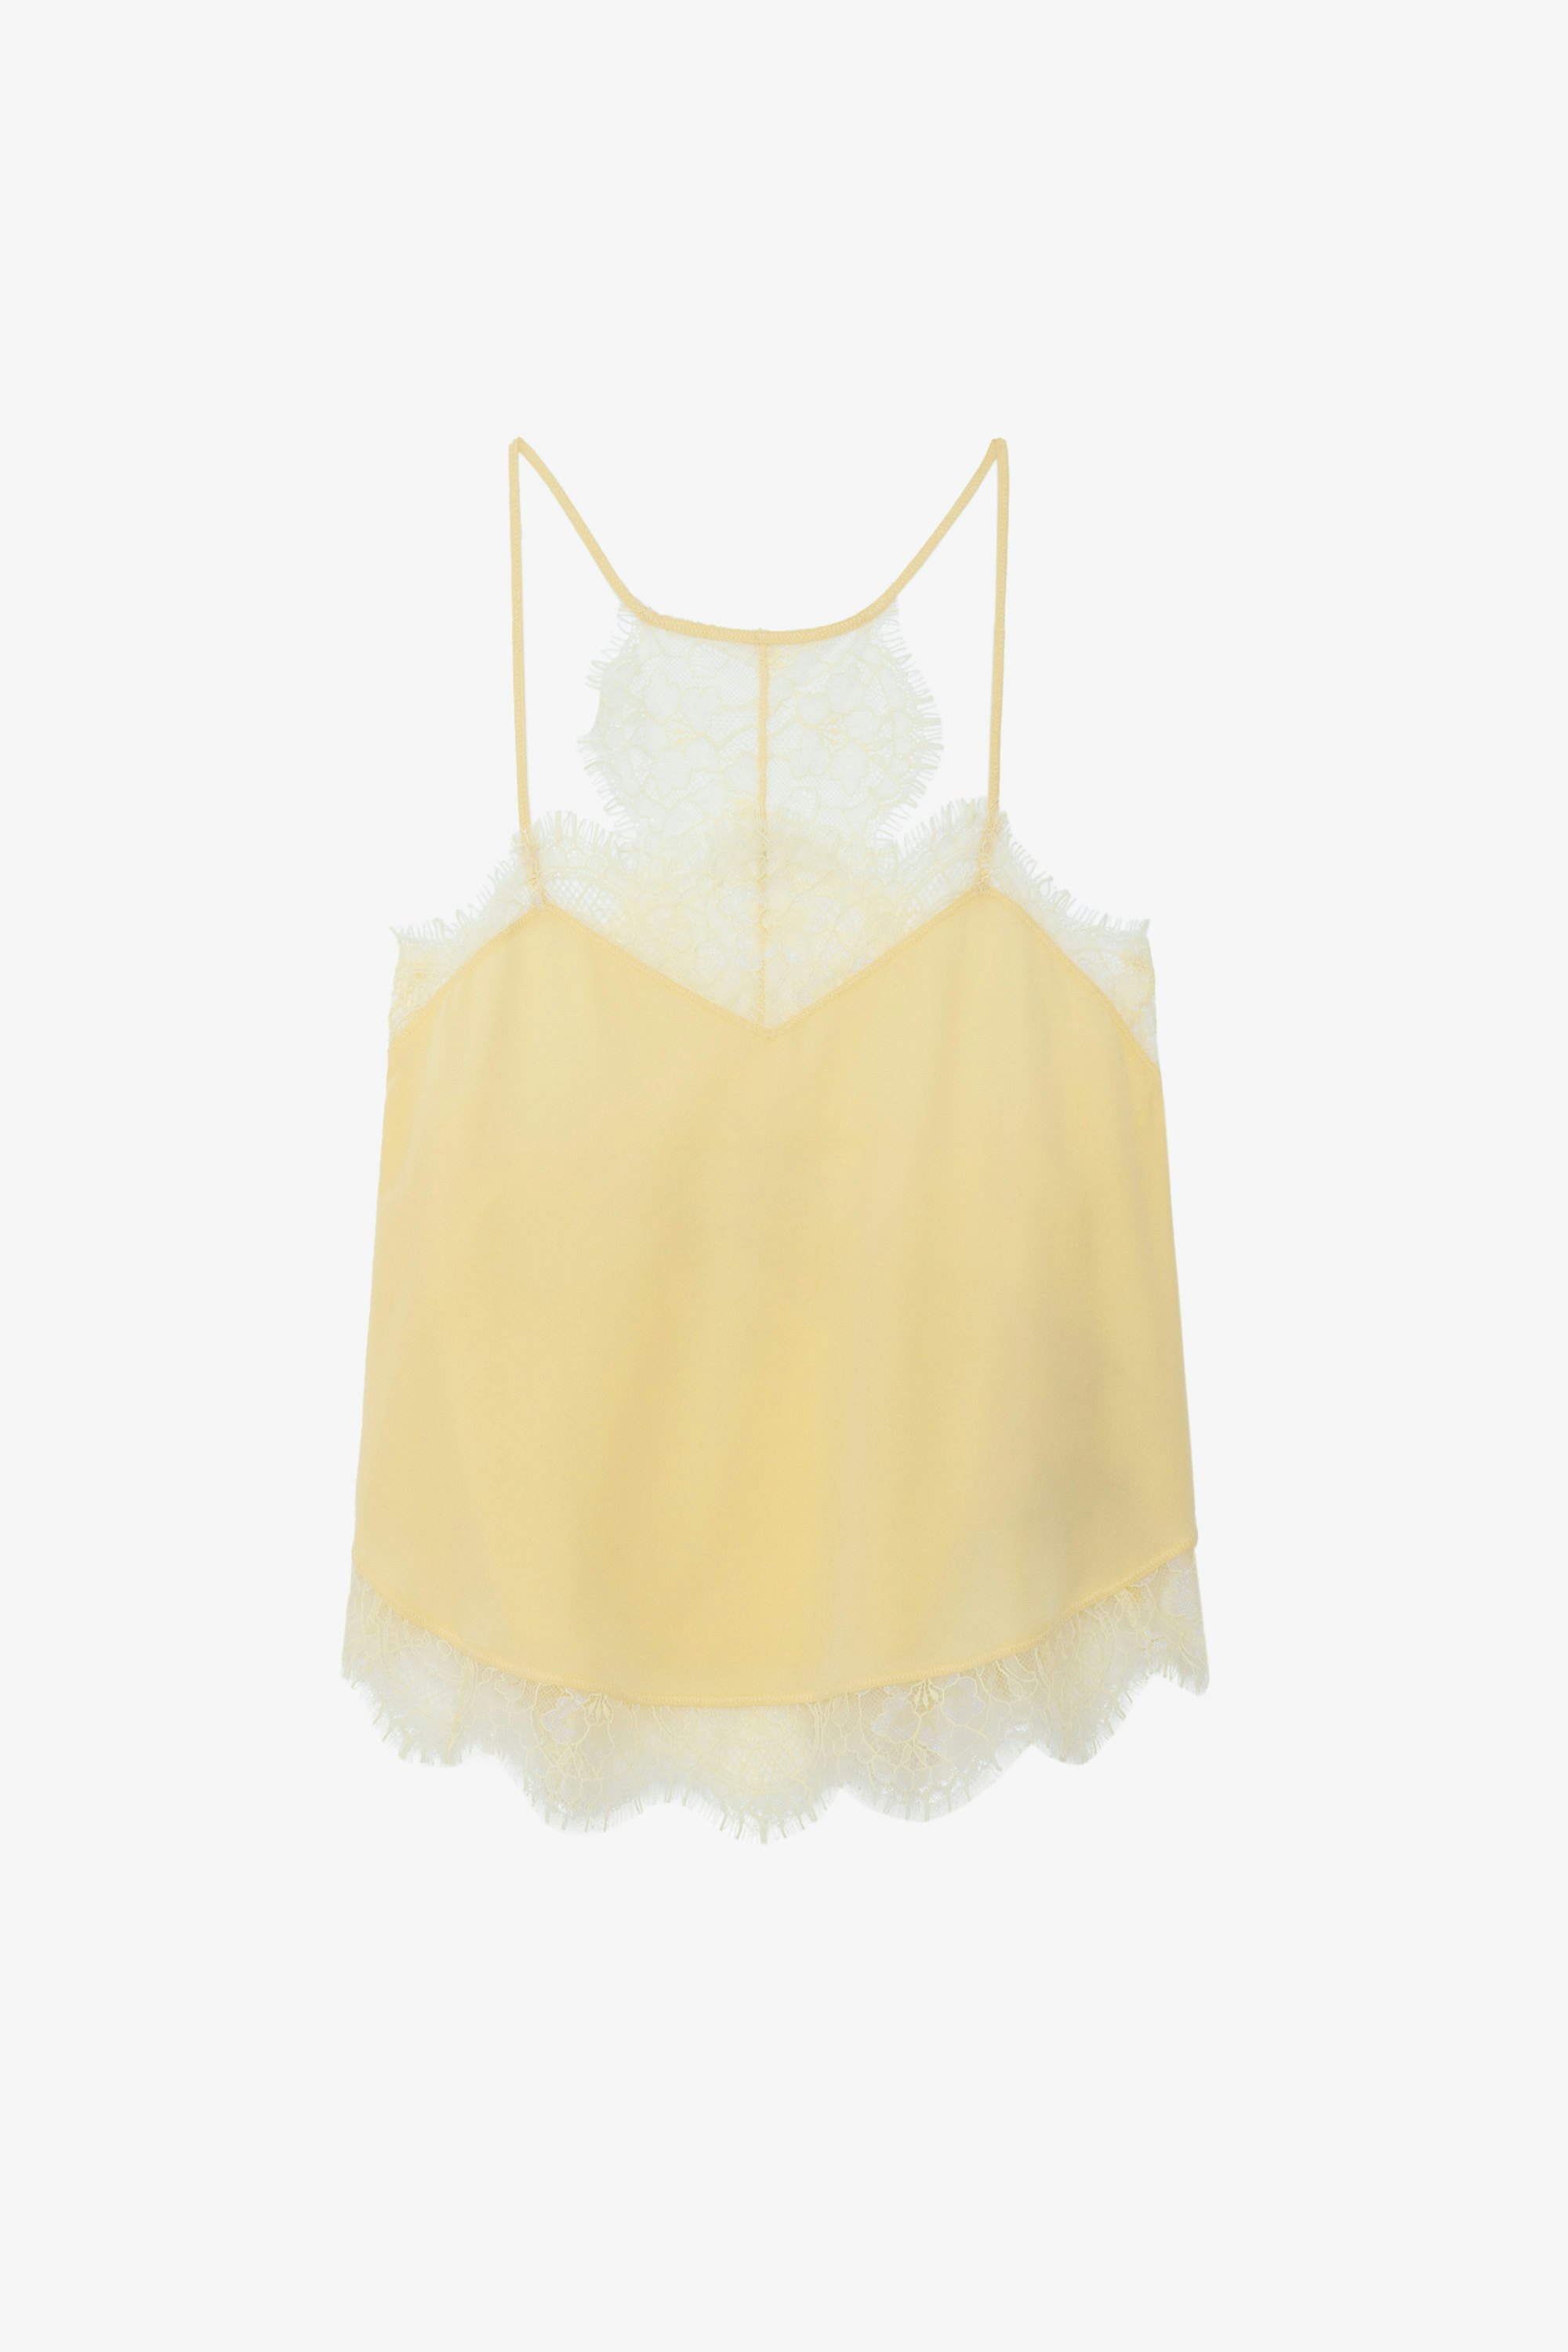 Claudy Silk Camisole - Light yellow silk camisole with thin straps and lace trim.